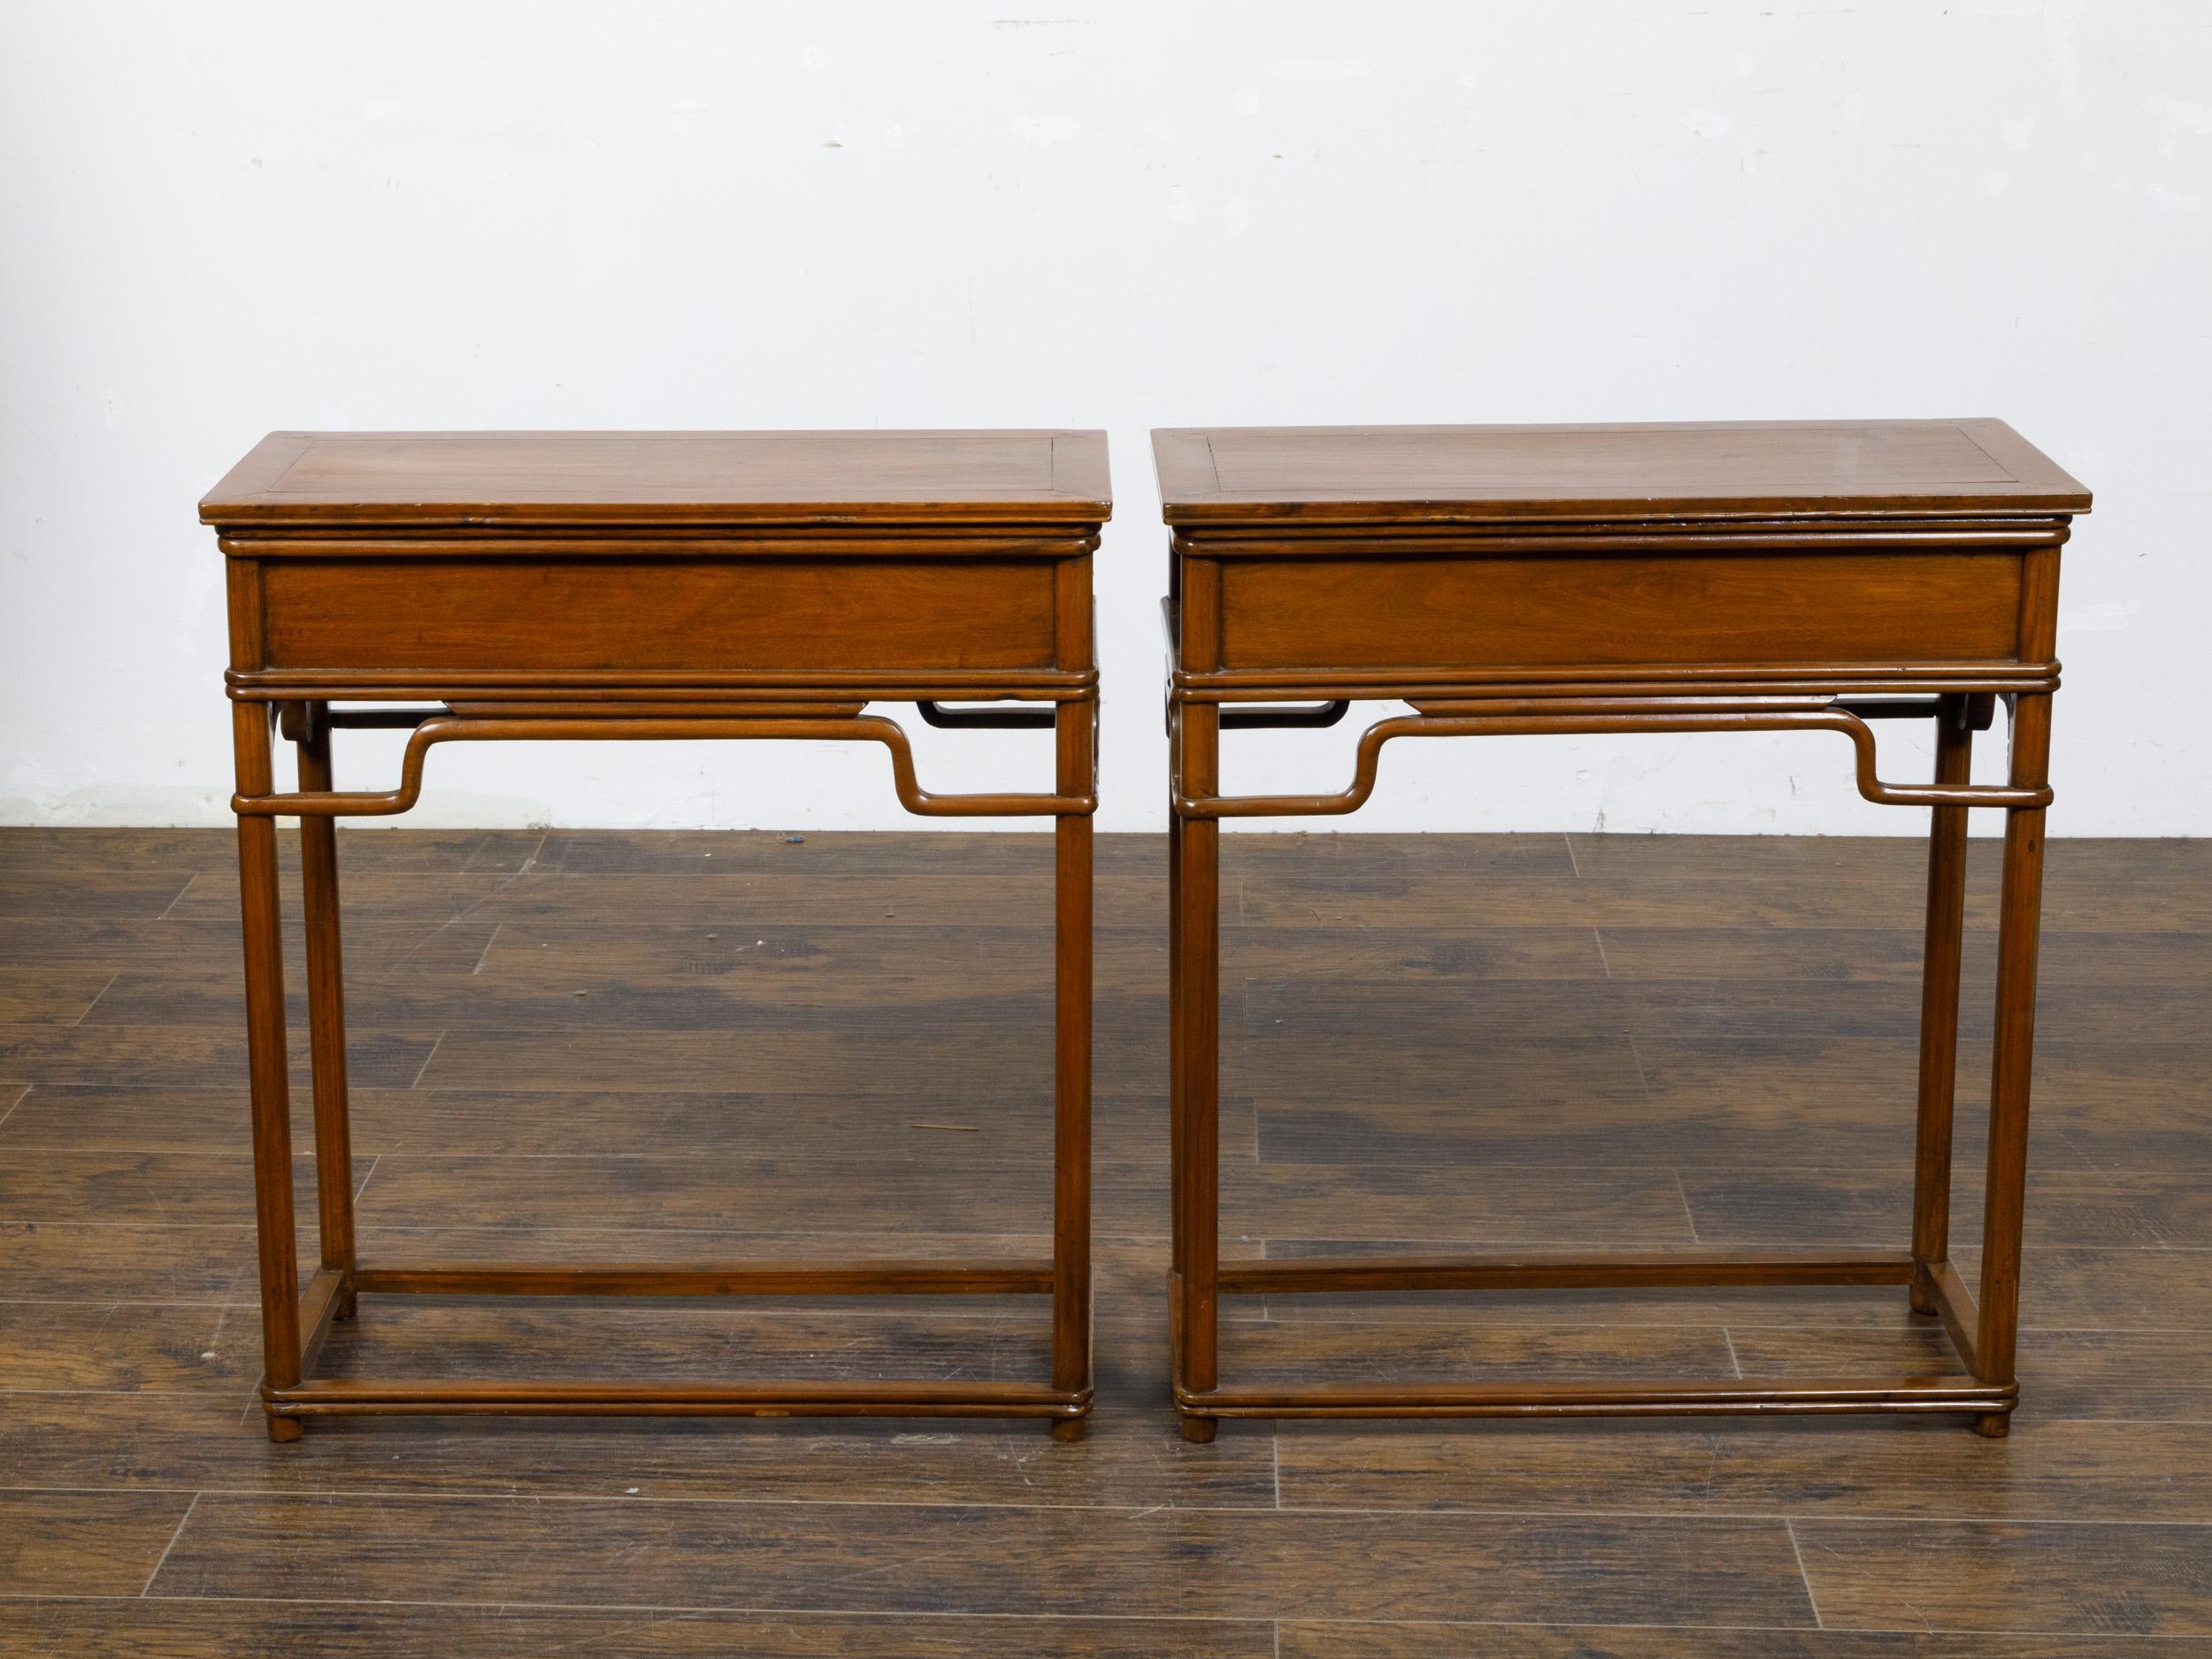 Carved Pair of Teak 19th Century Console Tables with Drawers and Humpback Stretchers For Sale